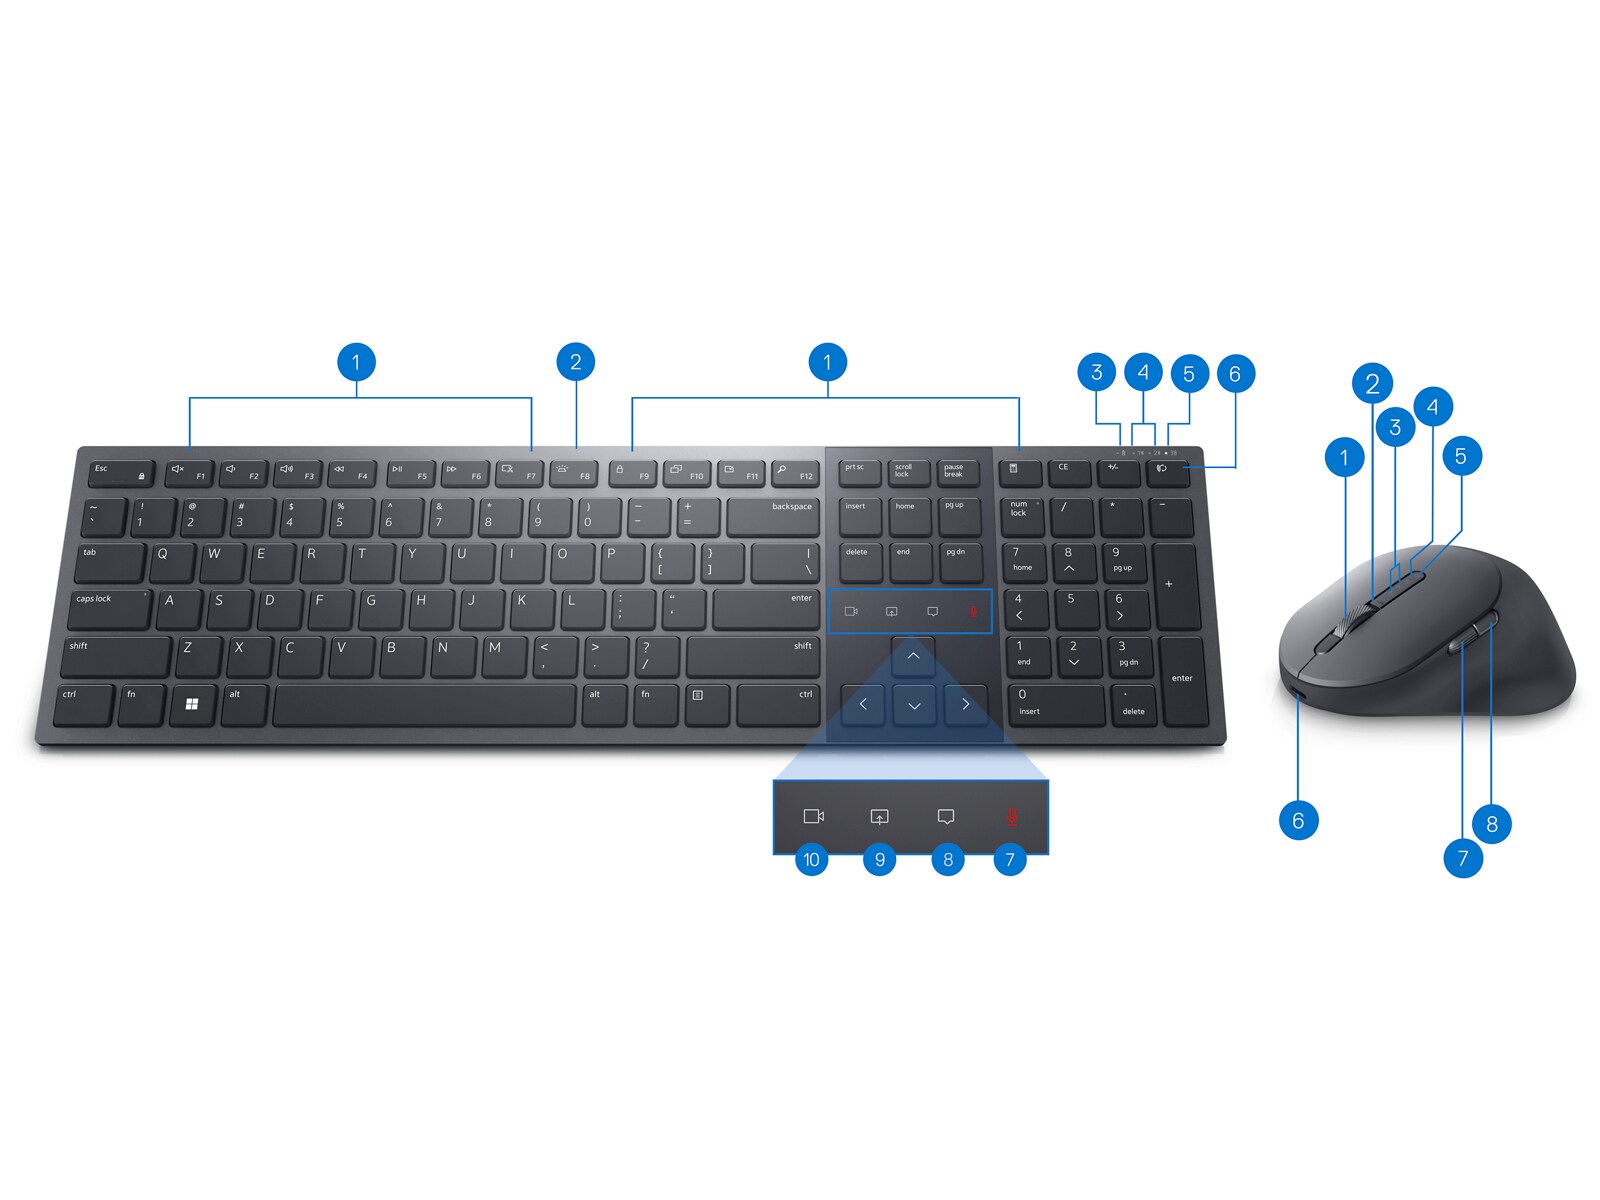 Dell KM900 Premier Collaboration Keyboard and Mouse with numbers from 1 to 10 showing the product features.